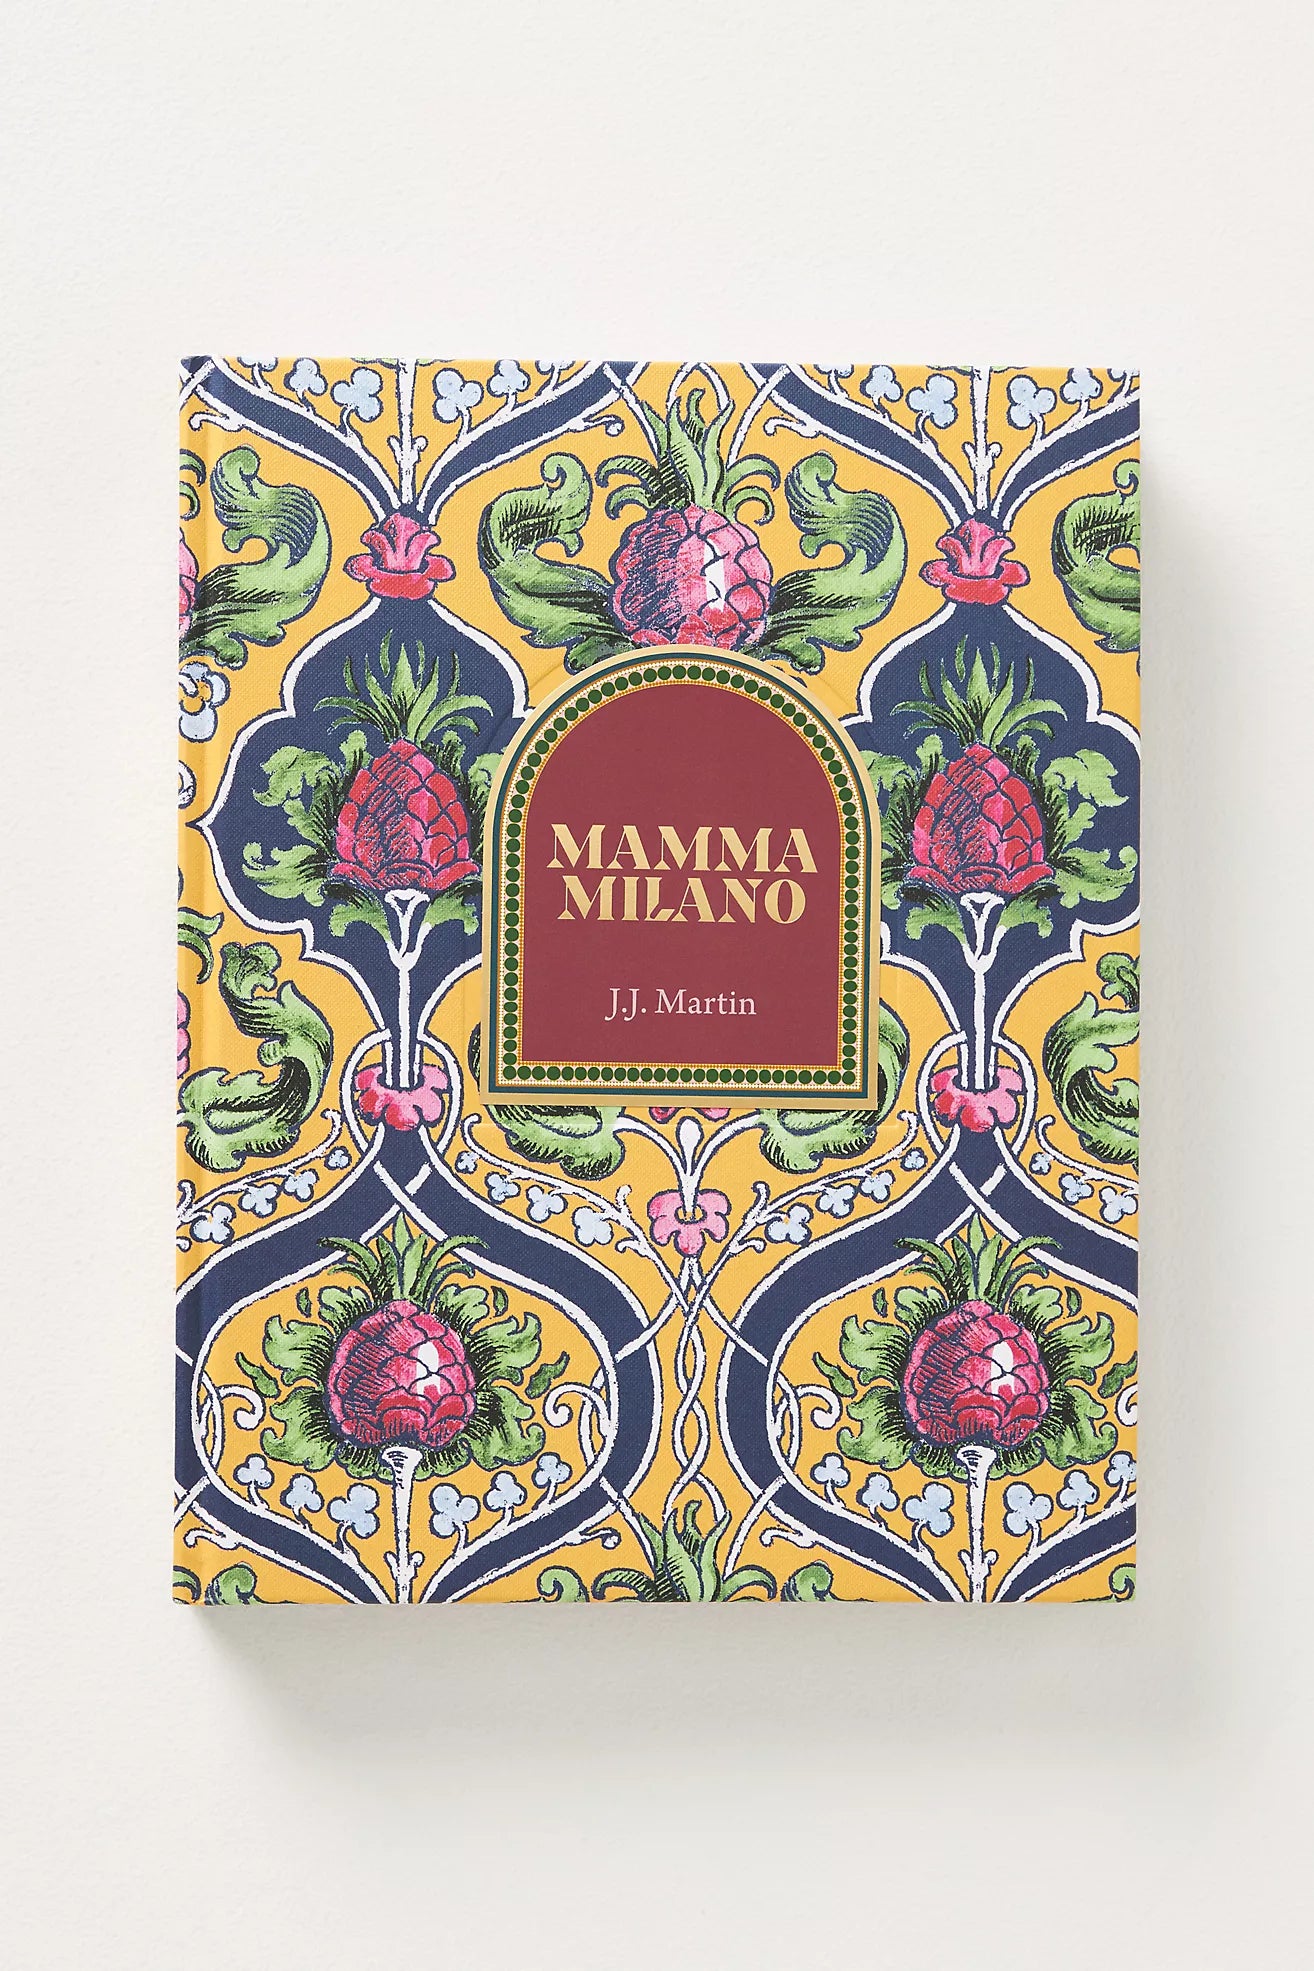 MAMMA MILANO: Lessons From the Motherland